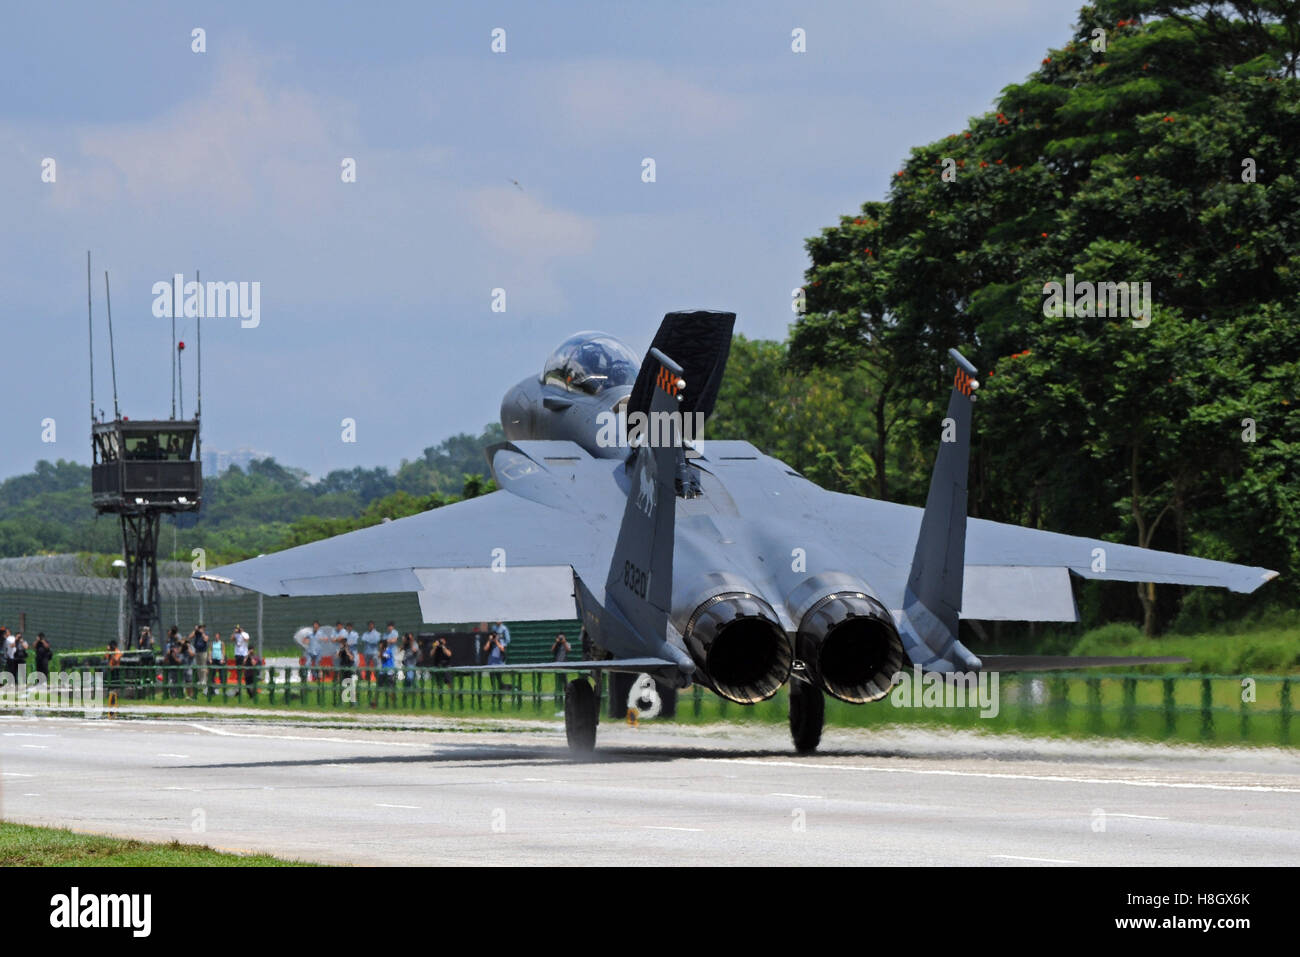 Singapore. 12th Nov, 2016. An F-15SG fighter plane of the Republic of Singapore Air Force (RSAF) lands during a rehearsal of exercise Torrent on Singapore's Lim Chu Kang road, Nov. 12, 2016. The Republic of Singapore Air Force (RSAF) Sunday conducted exercise Torrent, in which a public road was converted into a runway for aircraft take-off and landing. The alternate runway exercise, which was last conducted in 2008 and now is in its seventh edition, aims to increase RSAF's aircraft take-off and landing capability. © Then Chih Wey/Xinhua/Alamy Live News Stock Photo